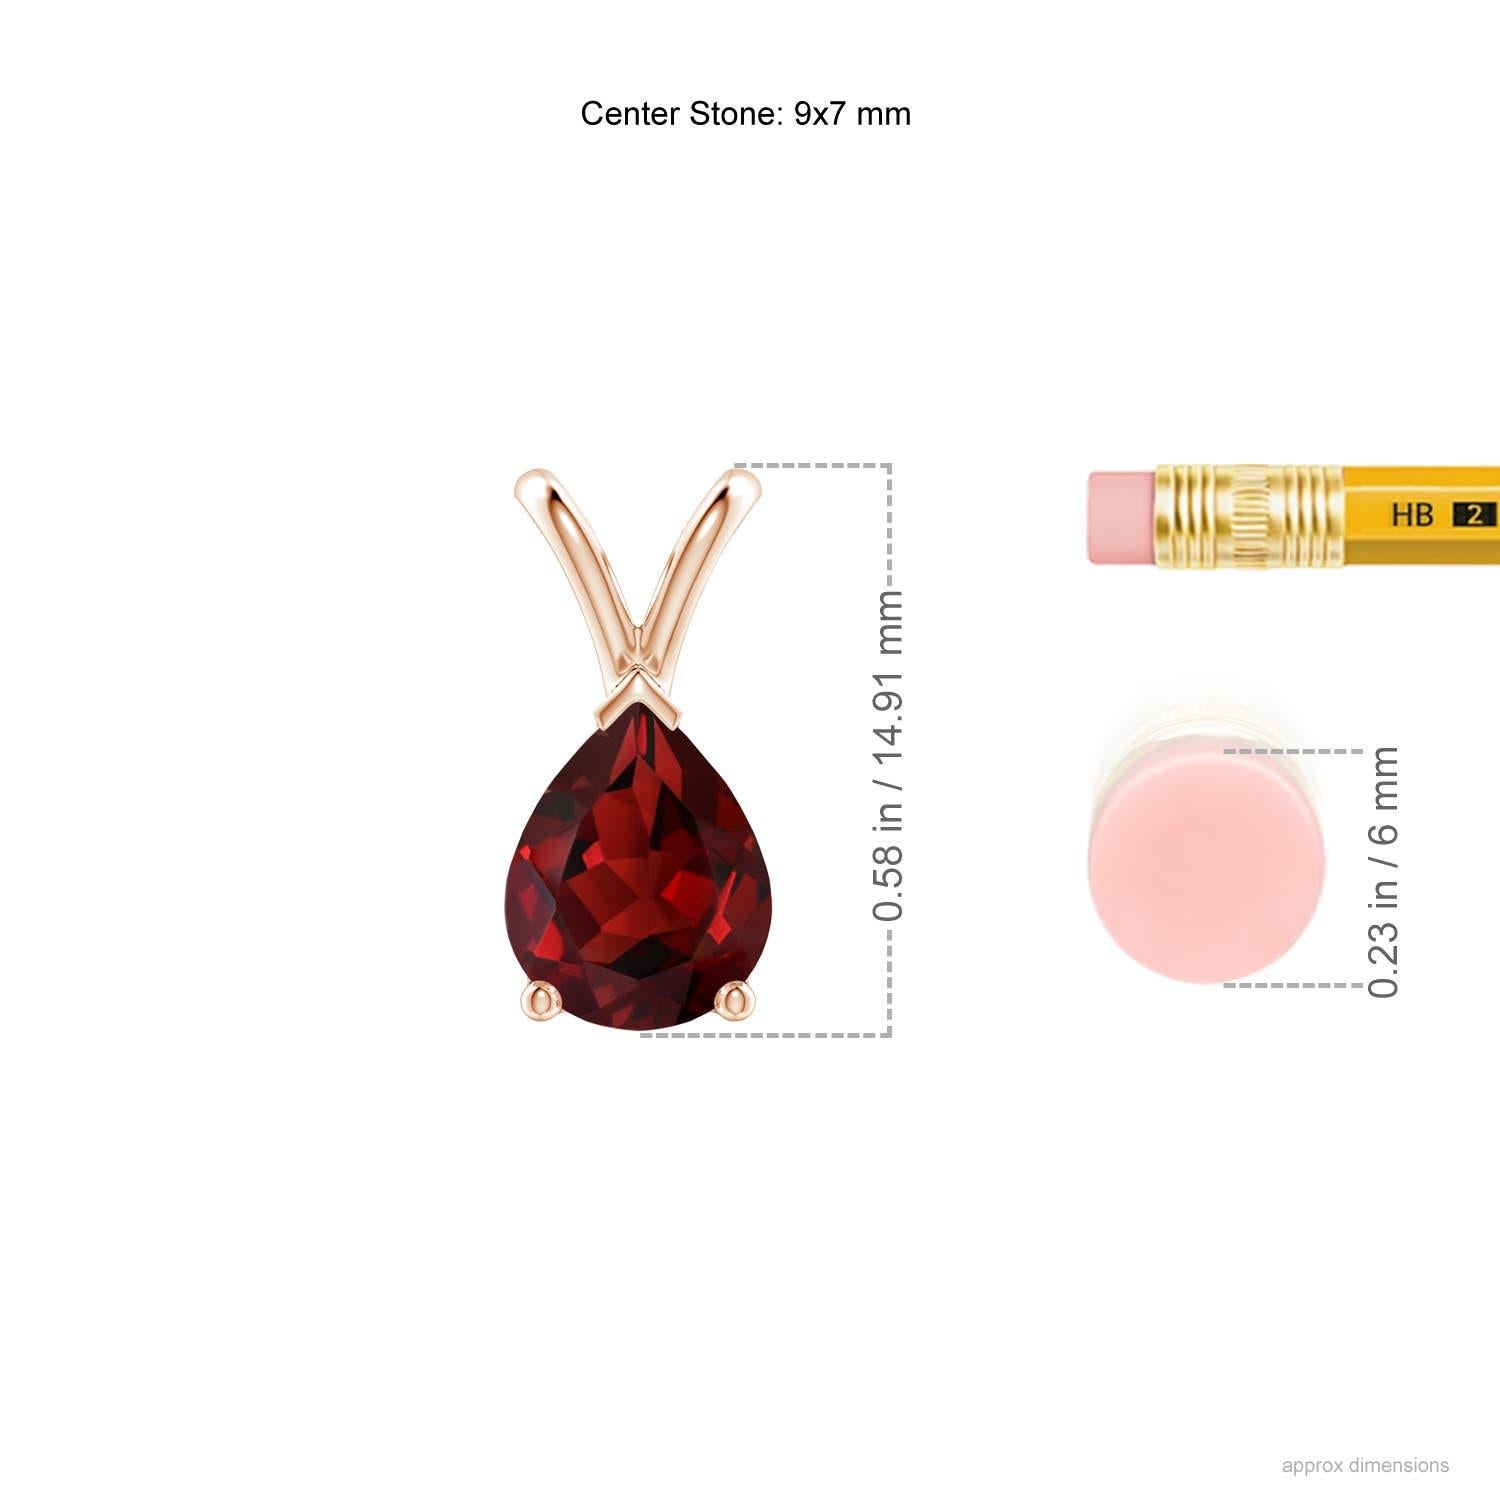 This 14k rose gold classic solitaire garnet pendant looks elegant in its minimalistic design. Linked to a shiny v-bale, the magnificent pear-shaped garnet captivates with its intense red hue. The three-prong setting of the gem showcases its